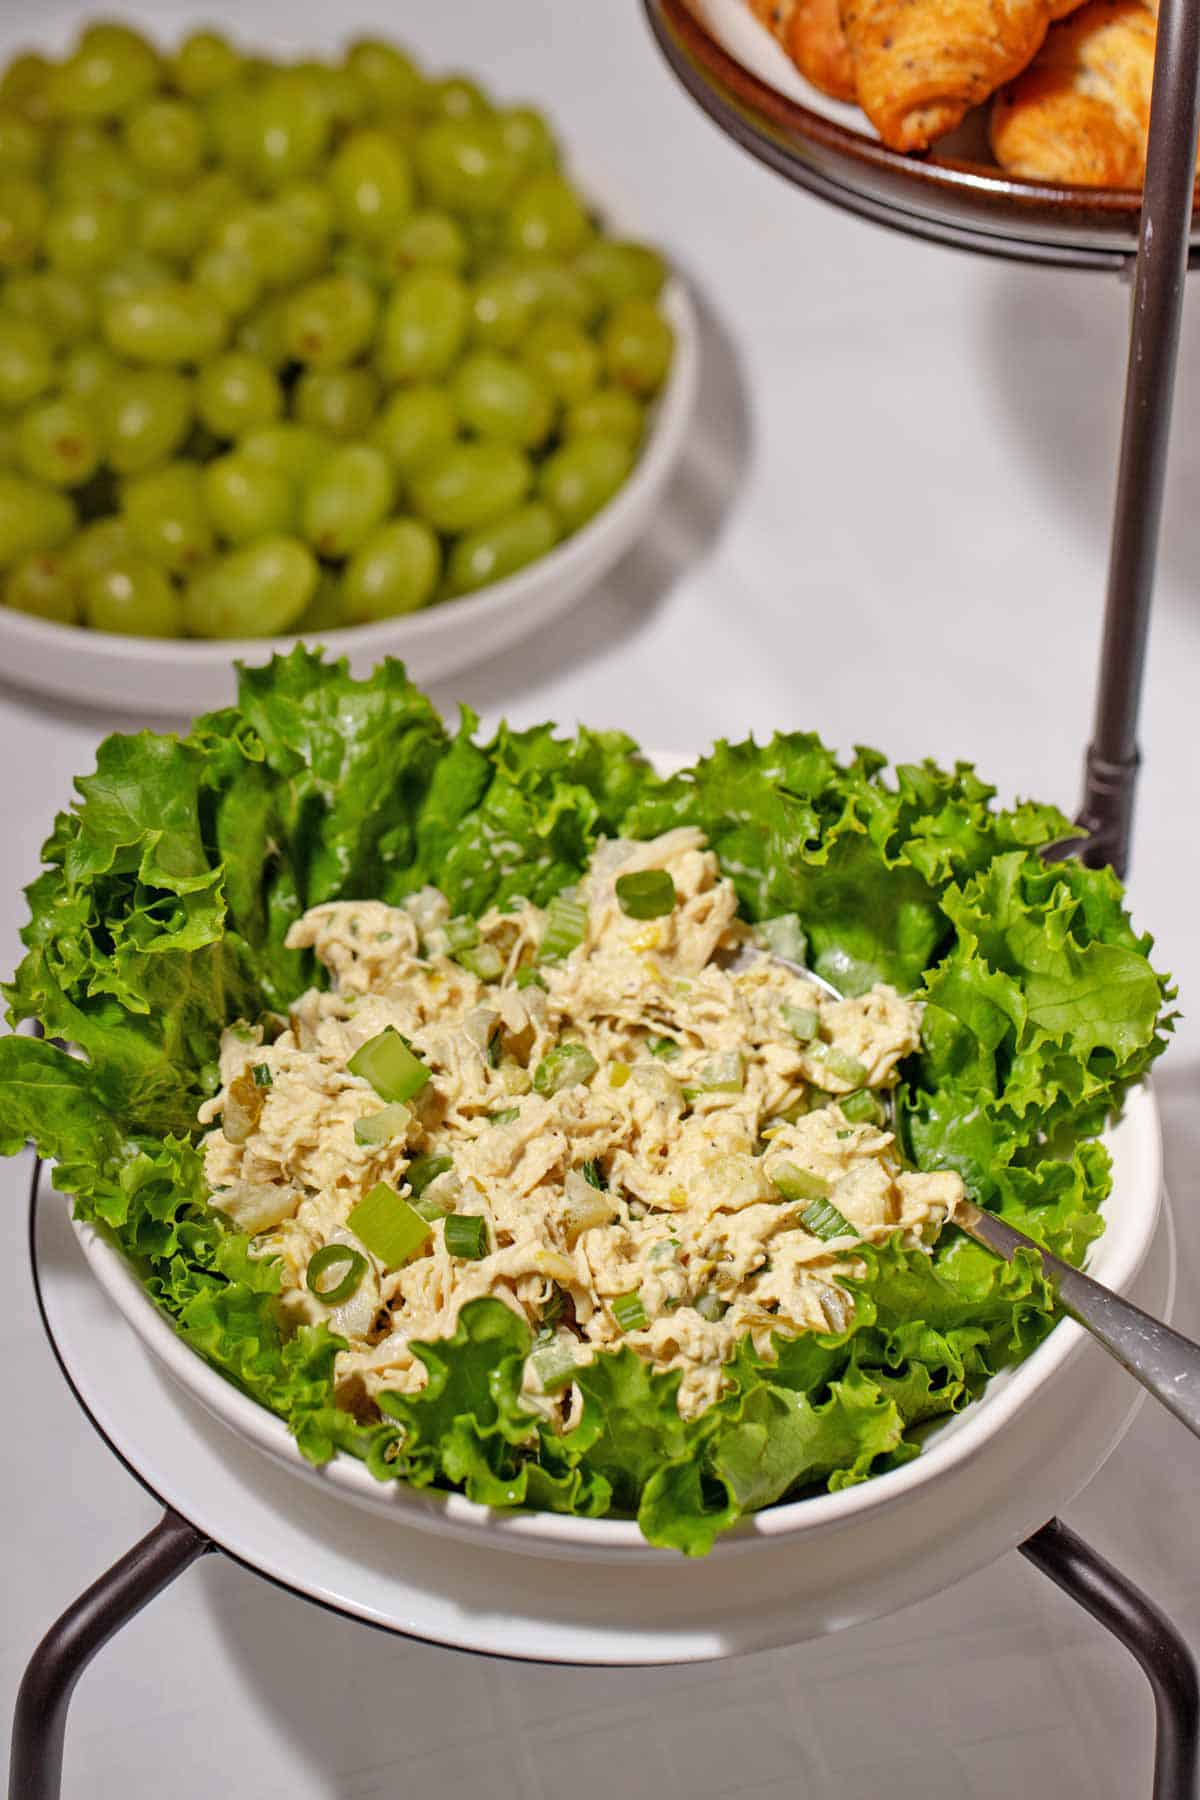 Store-bought chicken salad with ingredients added in a lettuce bowl.